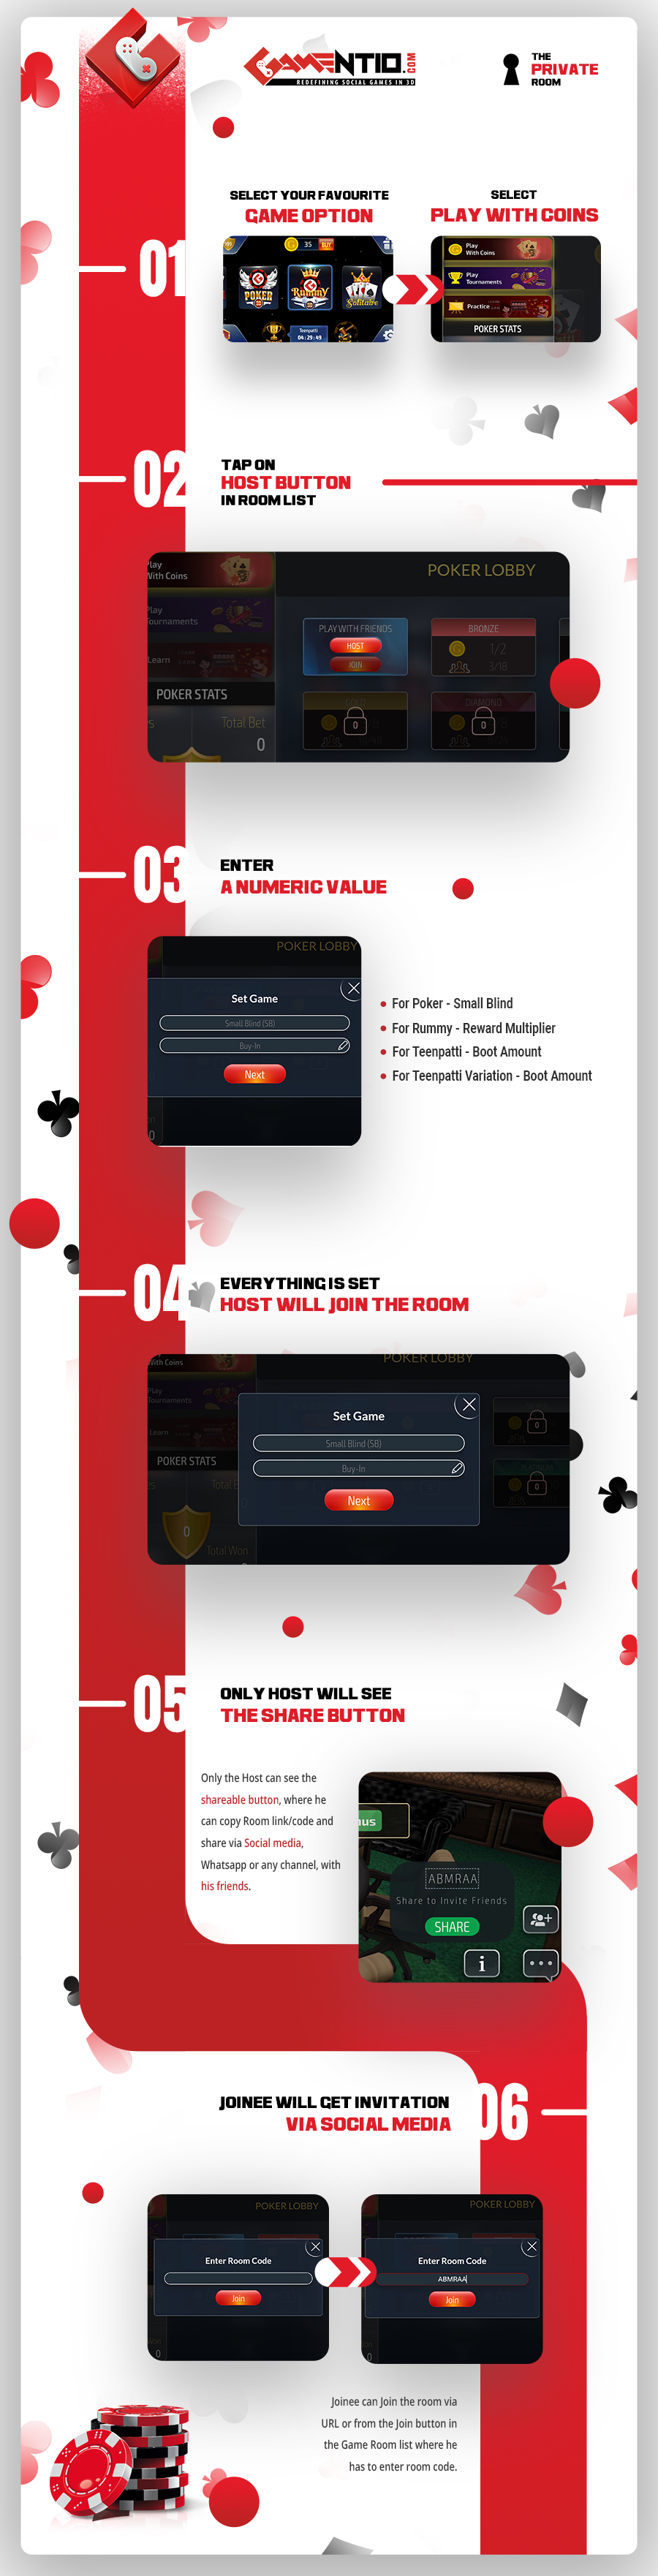 Invite friends to play poker, 3 patti or rummy online - Infographic